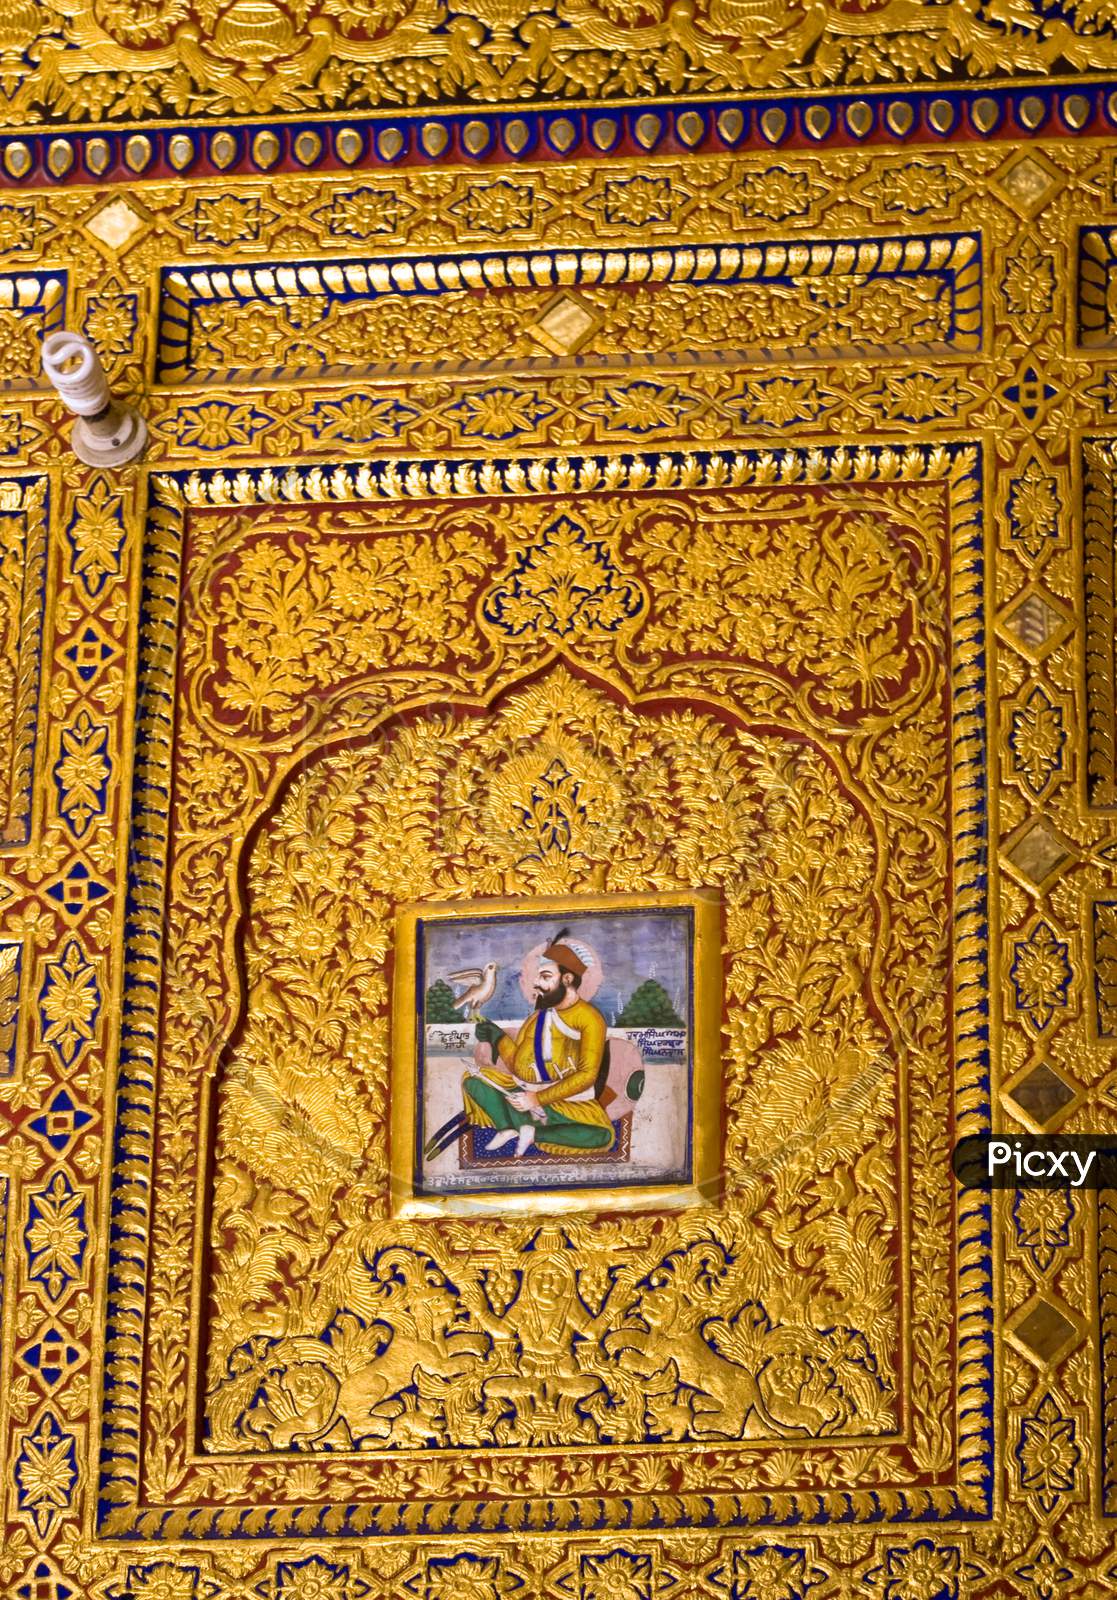 Golden Temple Architecture Details At Nanded,India.